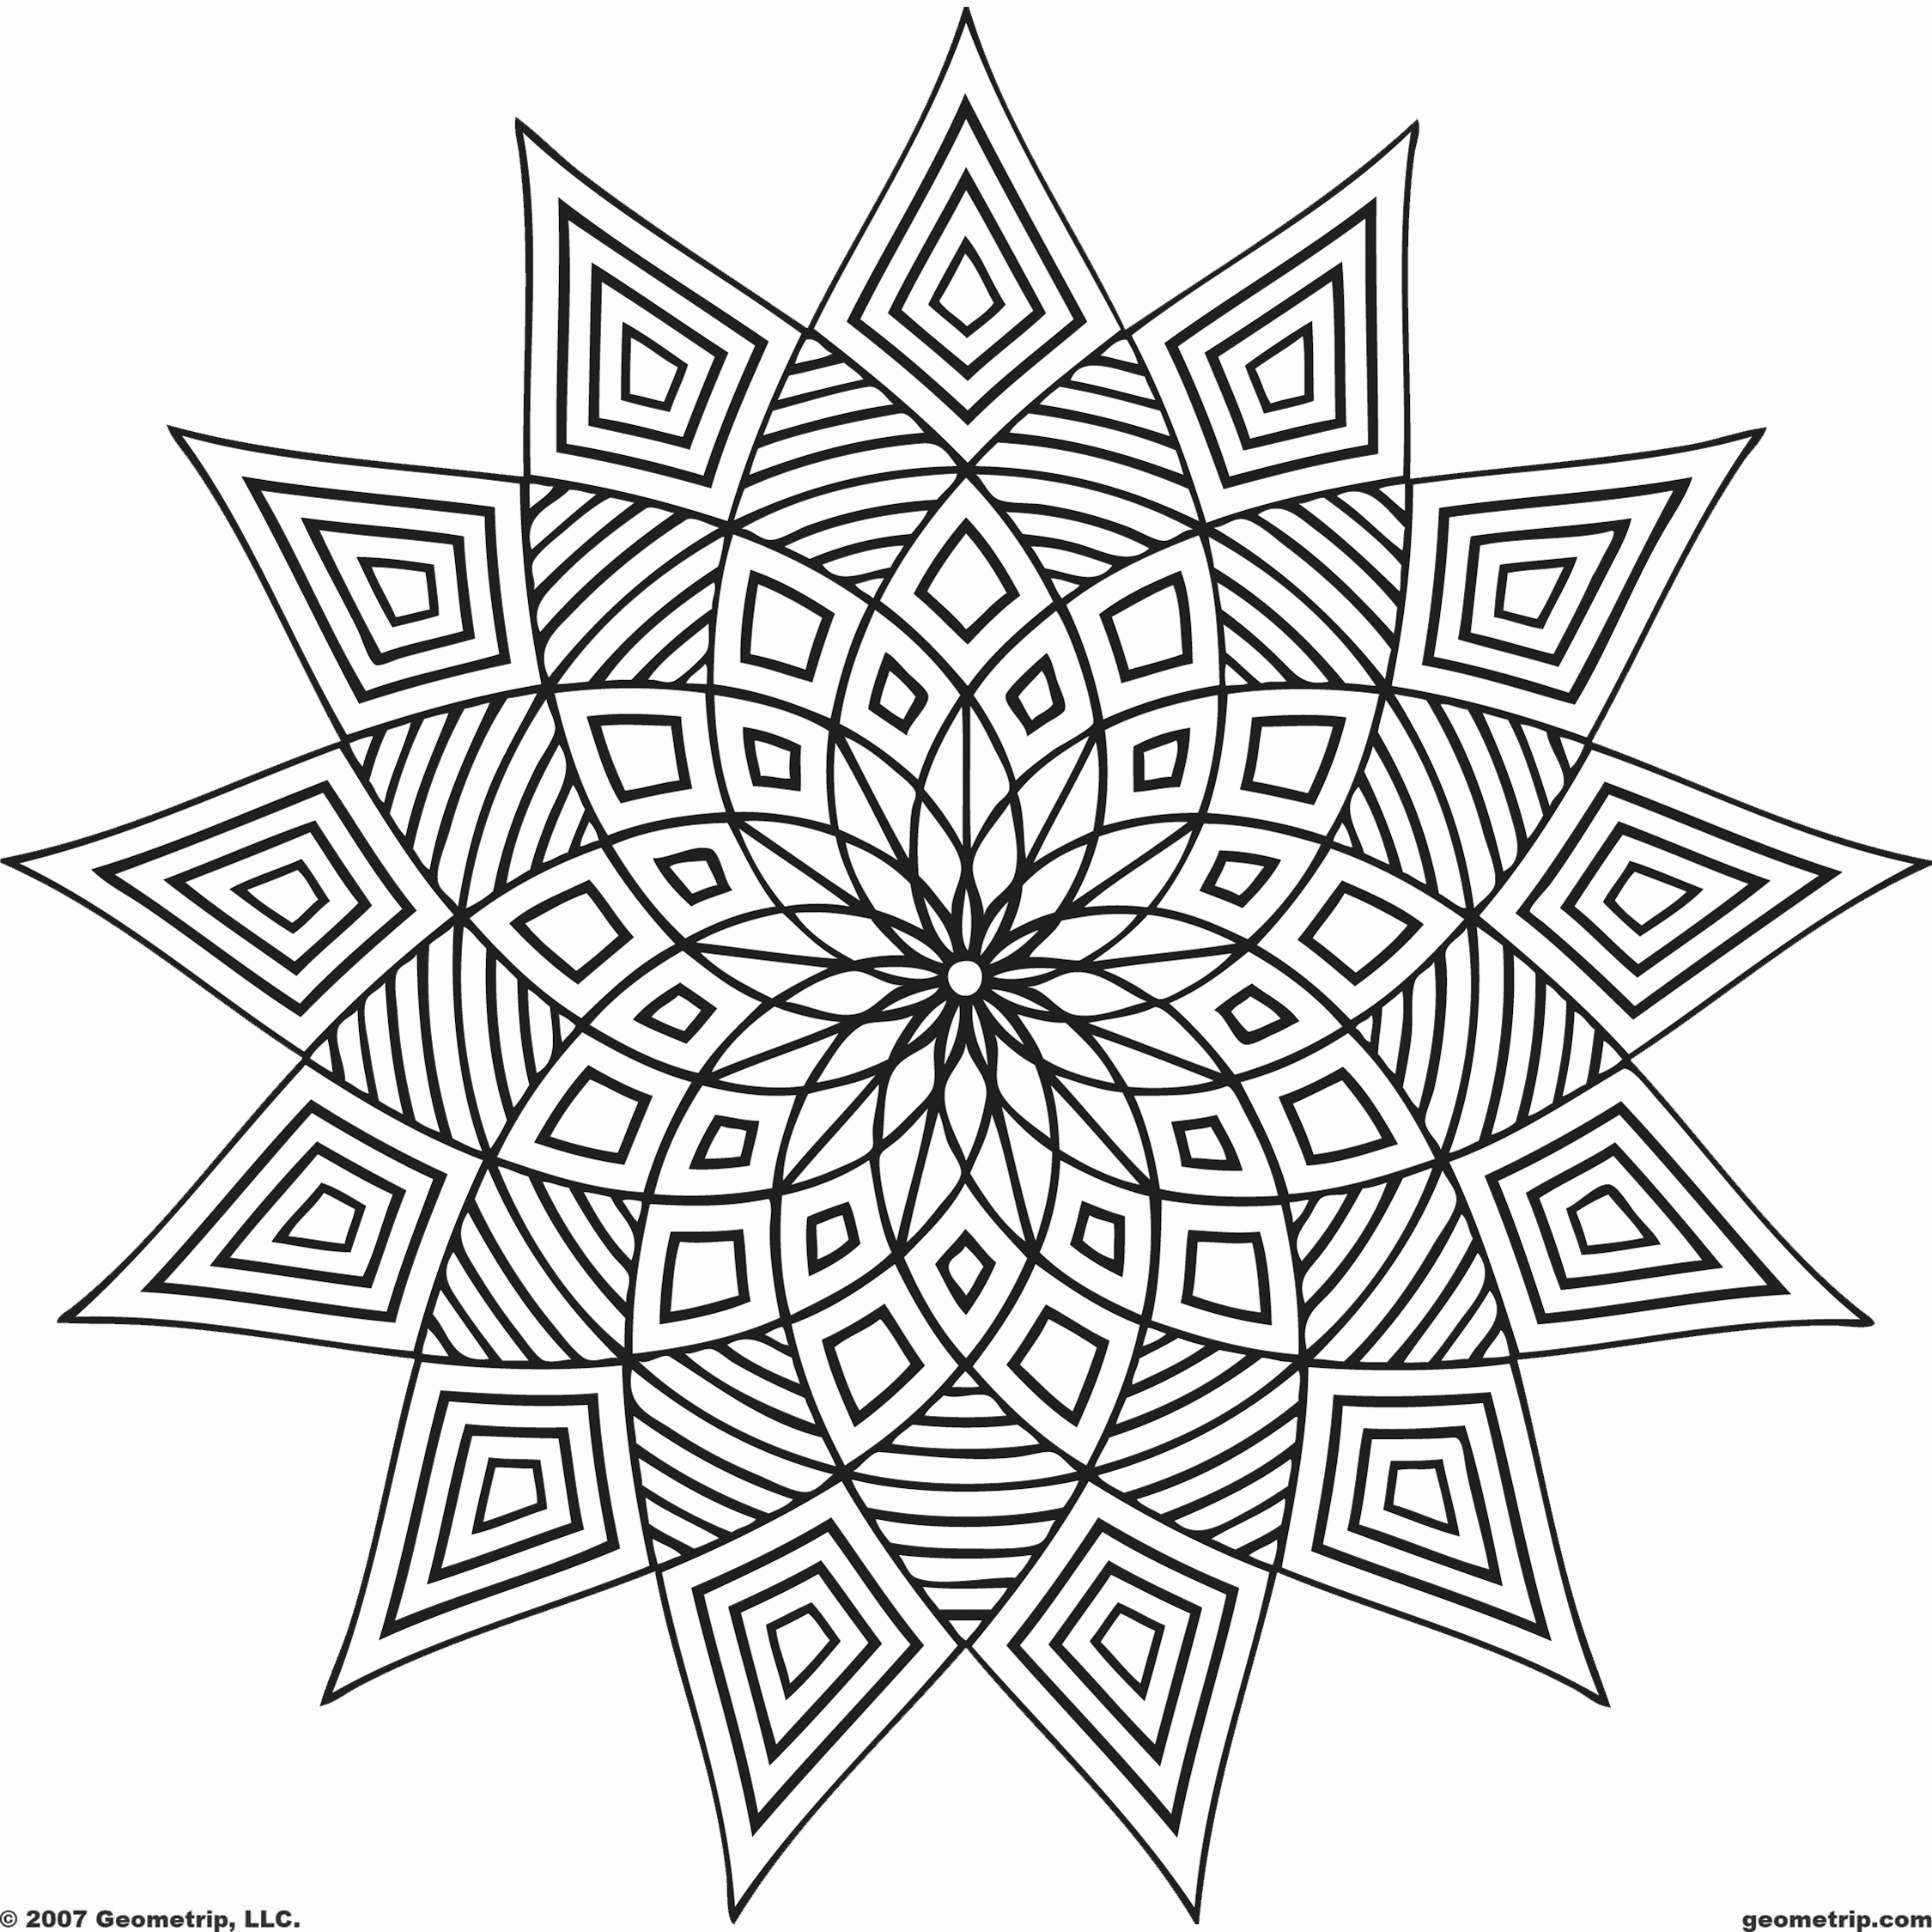 Awesome Pattern Coloring Pages - Coloring Pages For All Ages